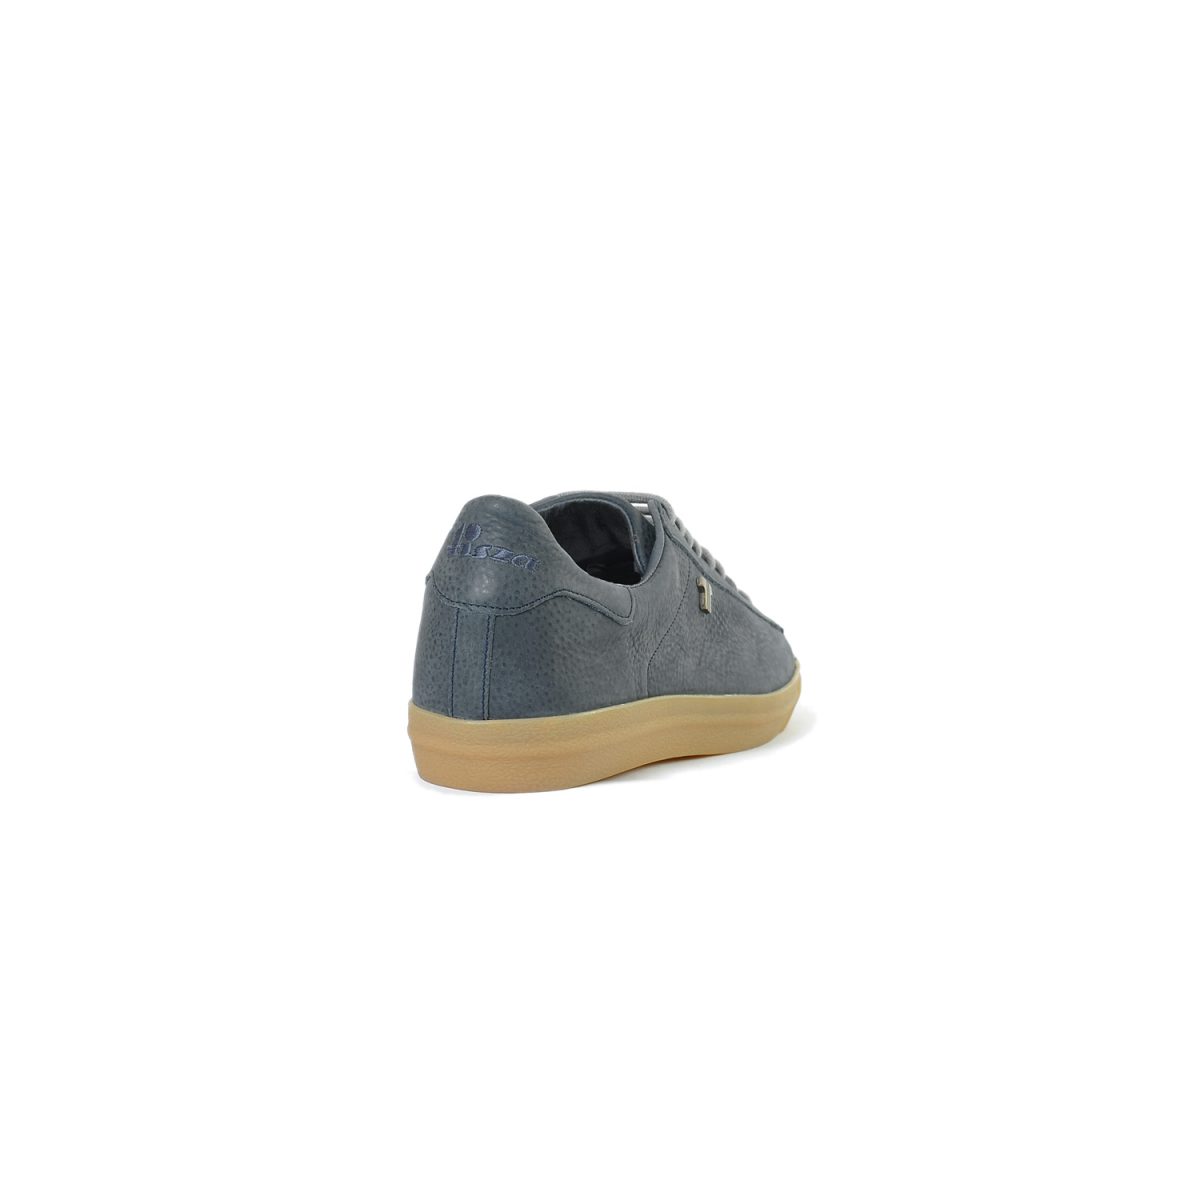 Tisza shoes - Simple - Navy